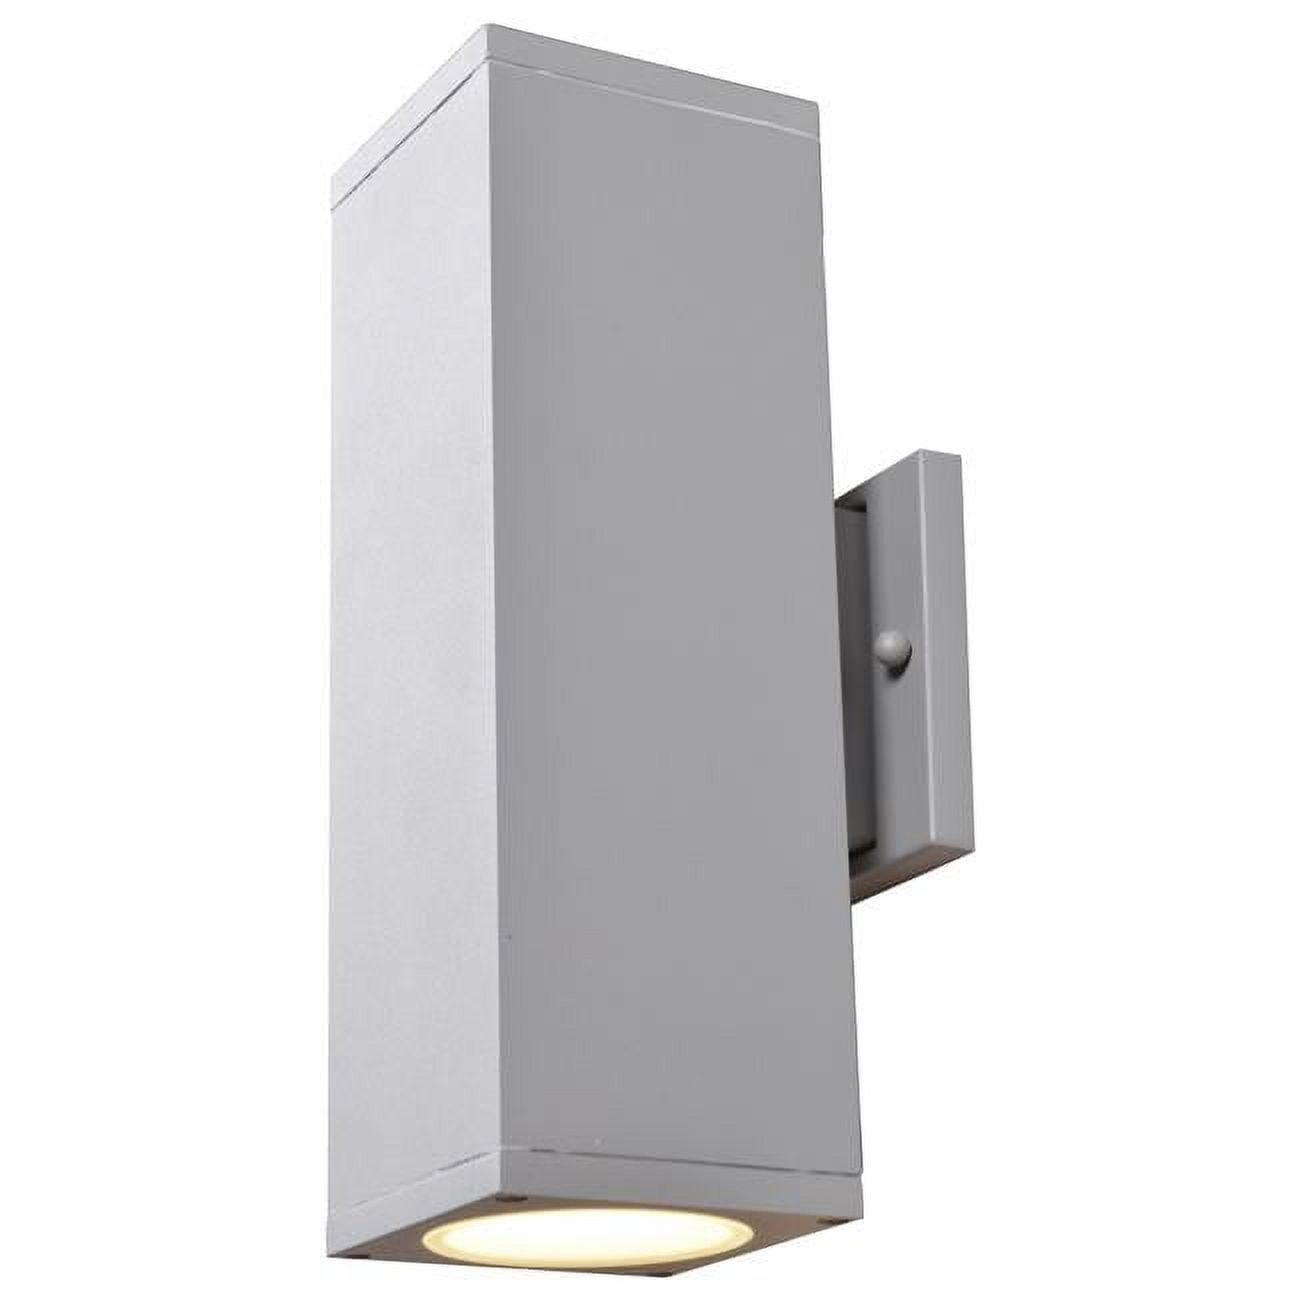 20033ledmg-sat-fst 4.5 X 12 X 5.5 In. Bayside Outdoor Square Cylinder Wall Fixture, Satin